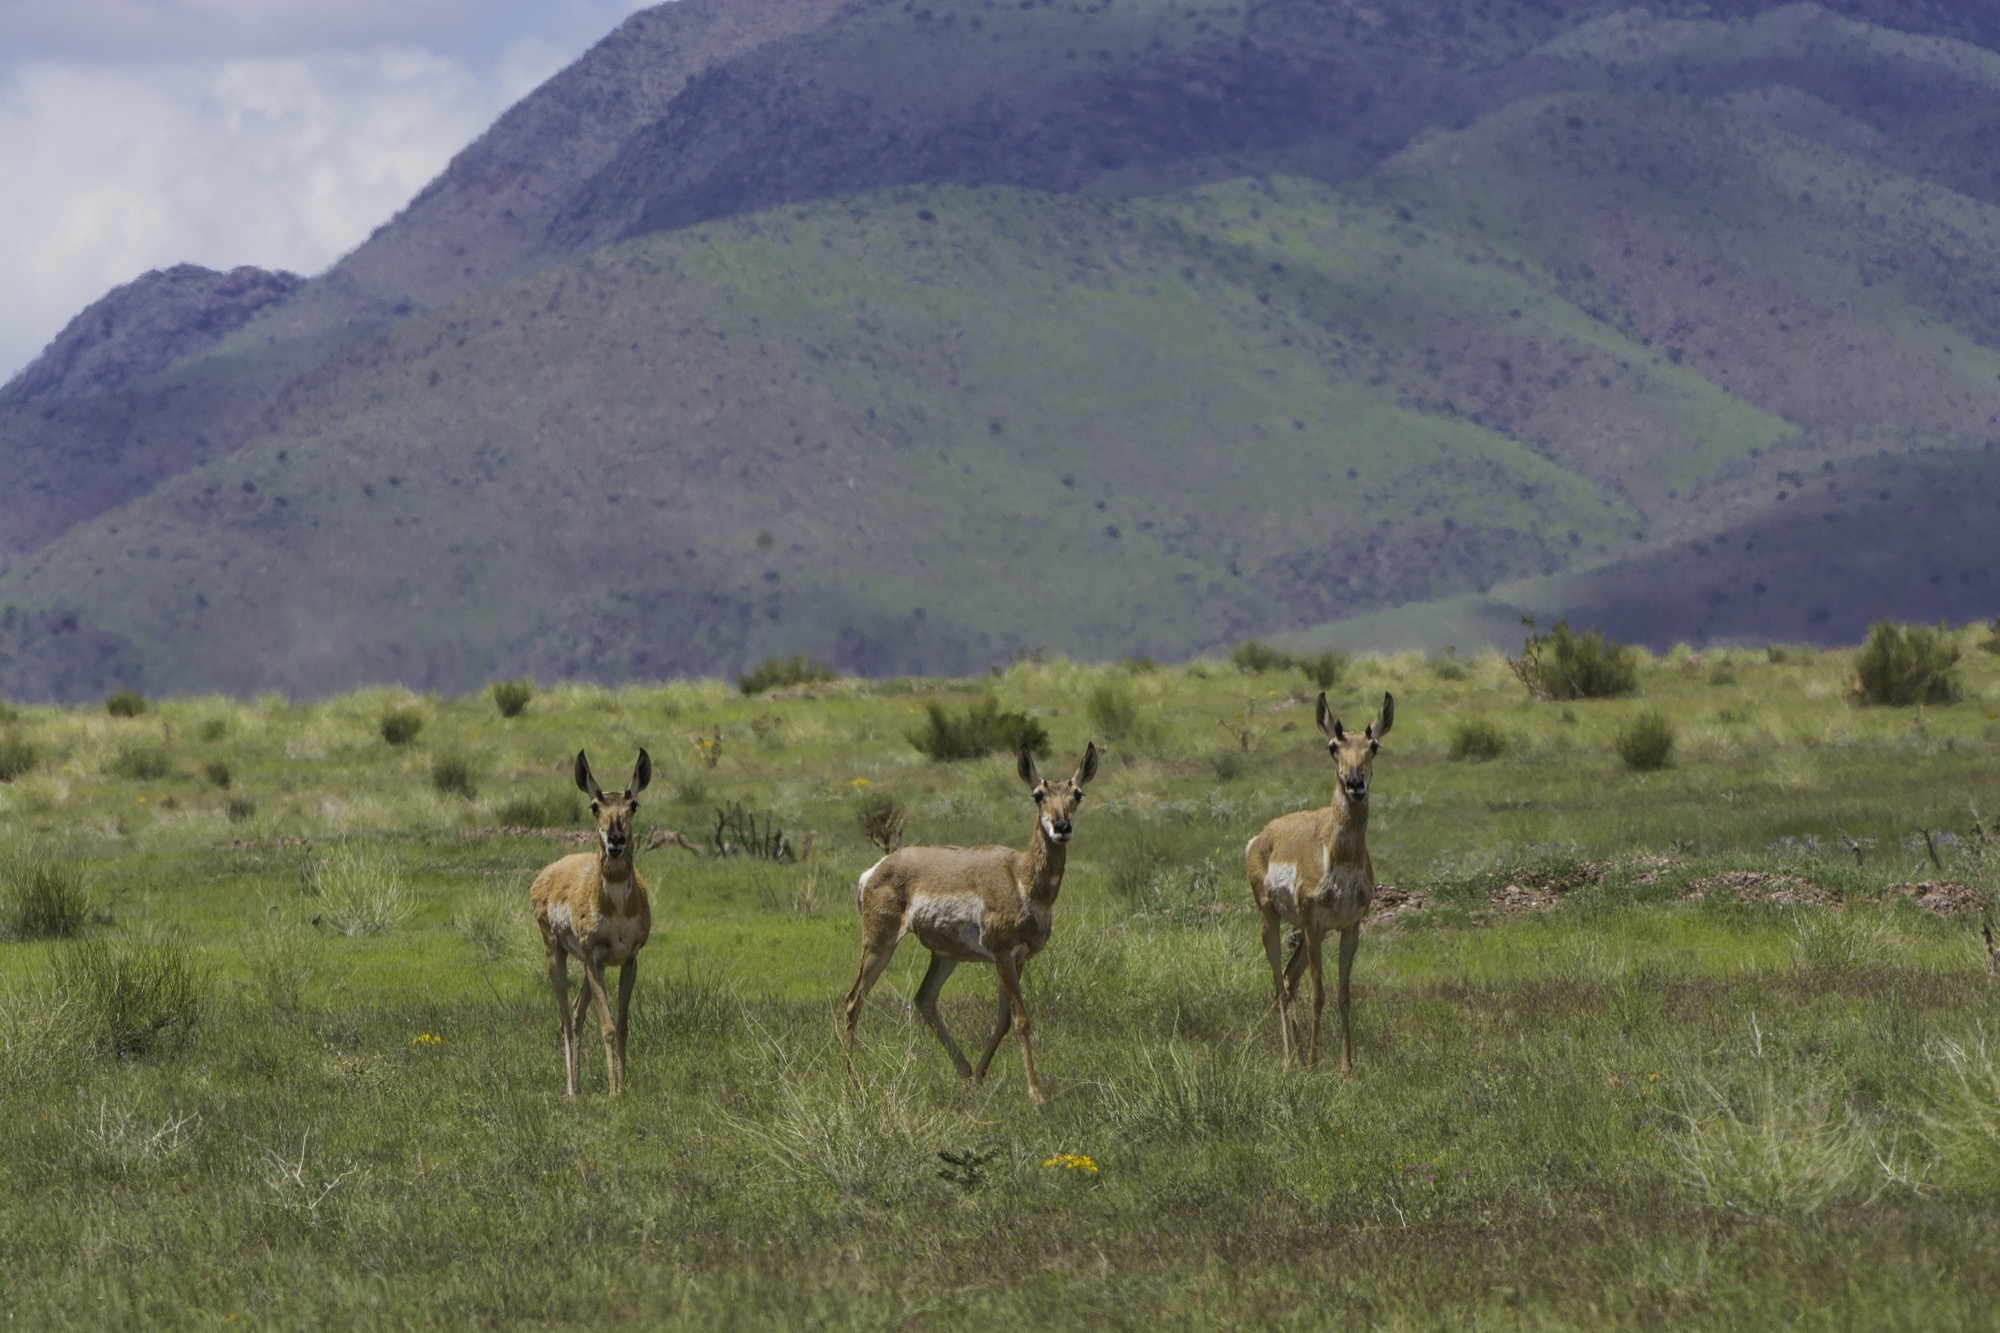 A group of three antelope